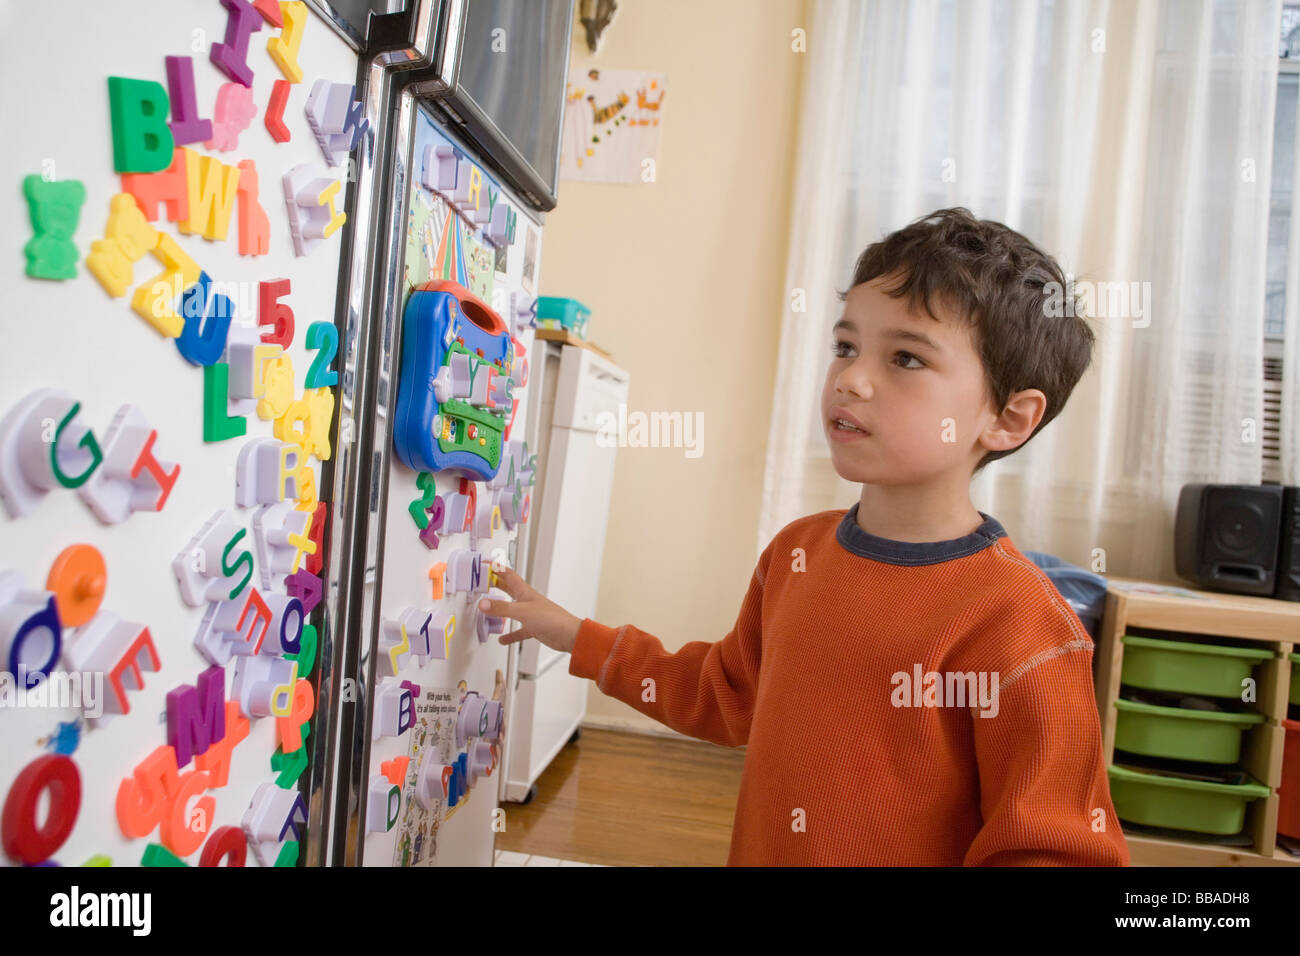 A young boy looking at toy magnets on a refrigerator door Stock Photo